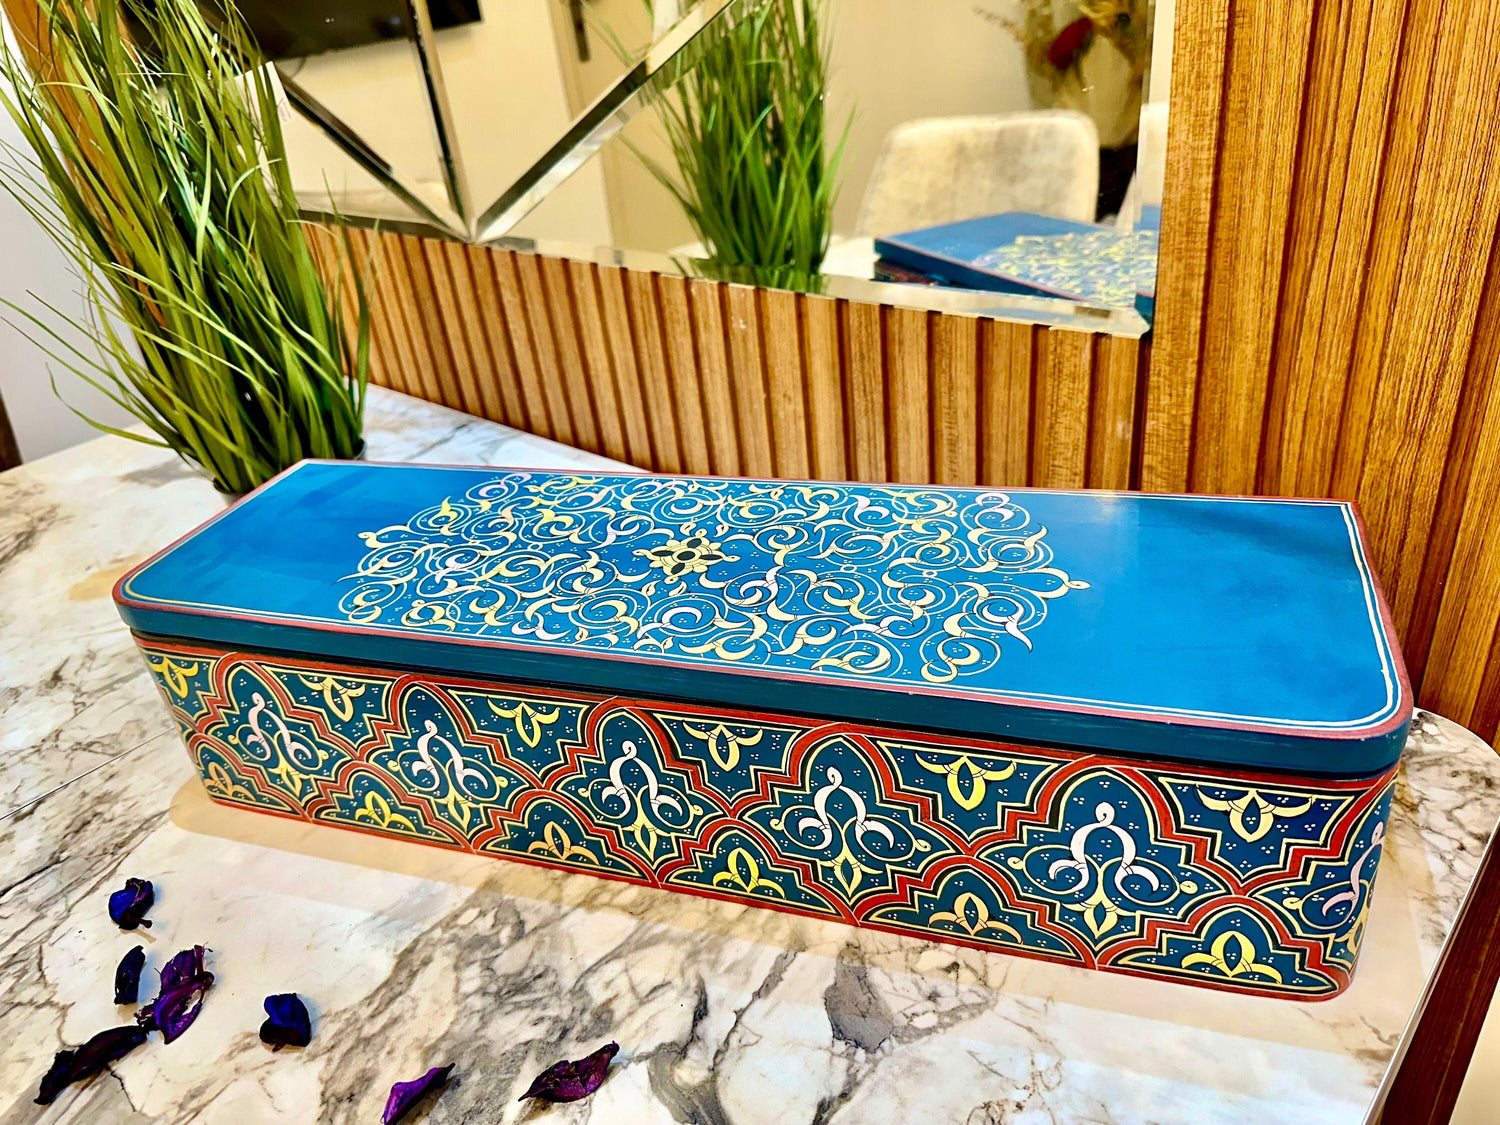 23"x7" Large Moroccan Hand-Painted Wood Box with Floral Motifs,Wood Storage jewellery Box,Boho Home Ethnic Decor,gift wood box